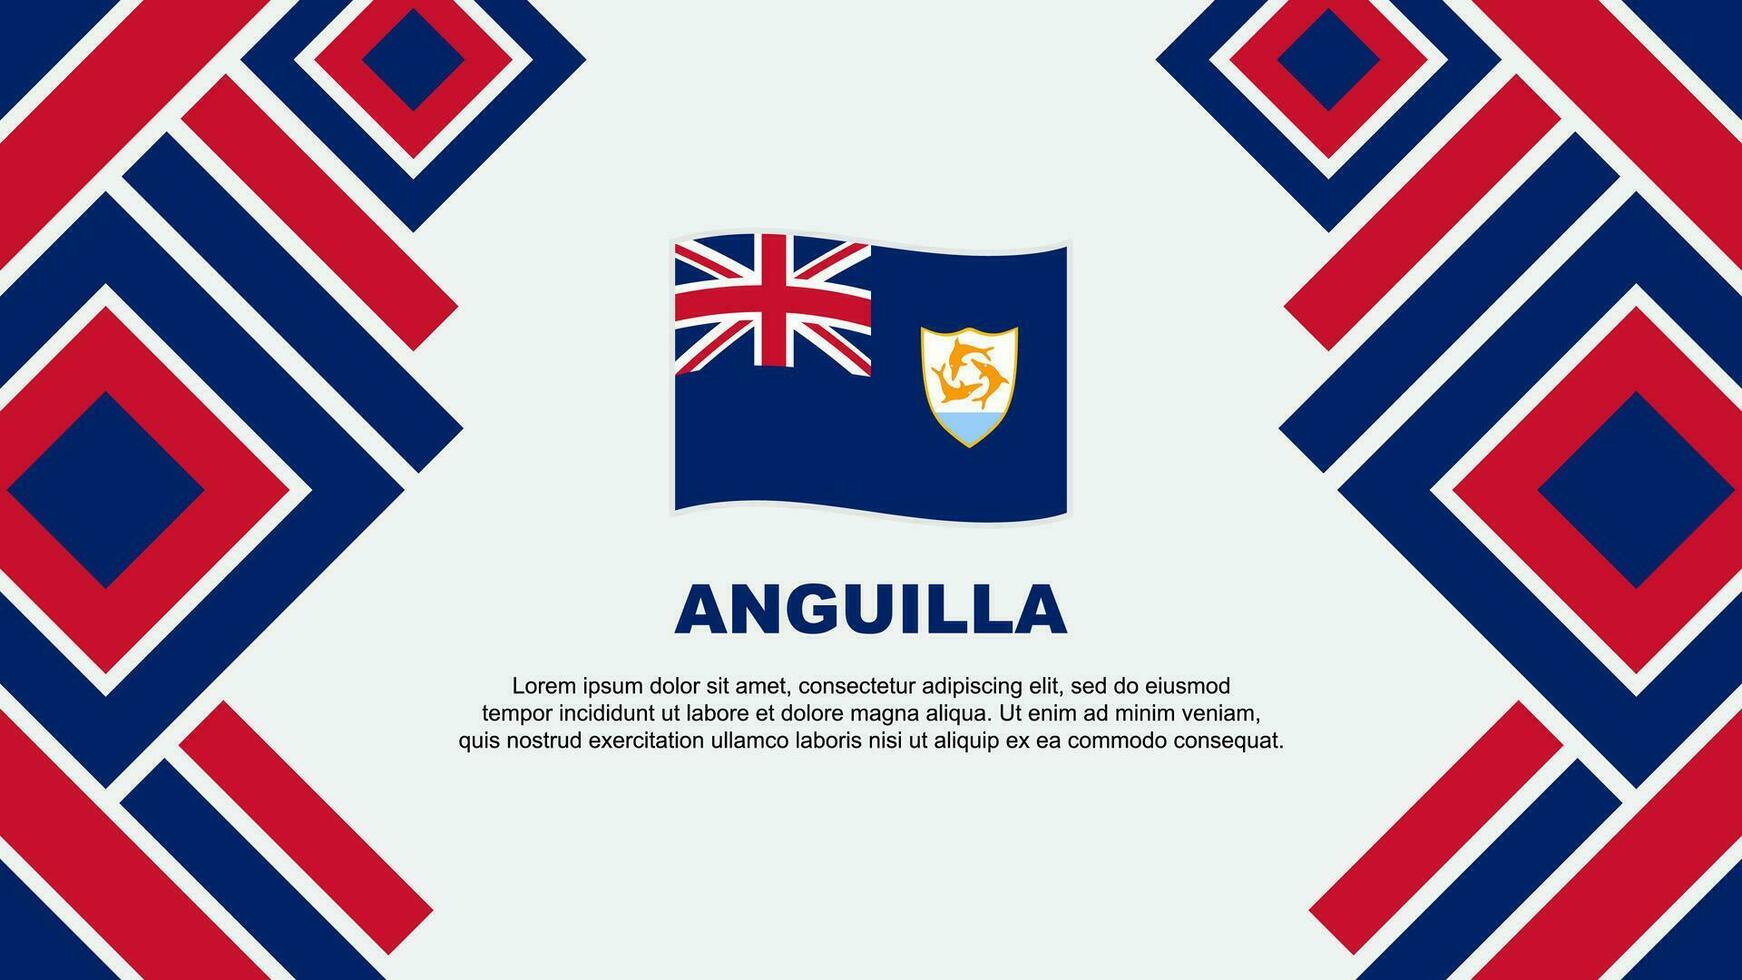 Anguilla Flag Abstract Background Design Template. Anguilla Independence Day Banner Wallpaper Vector Illustration. Anguilla